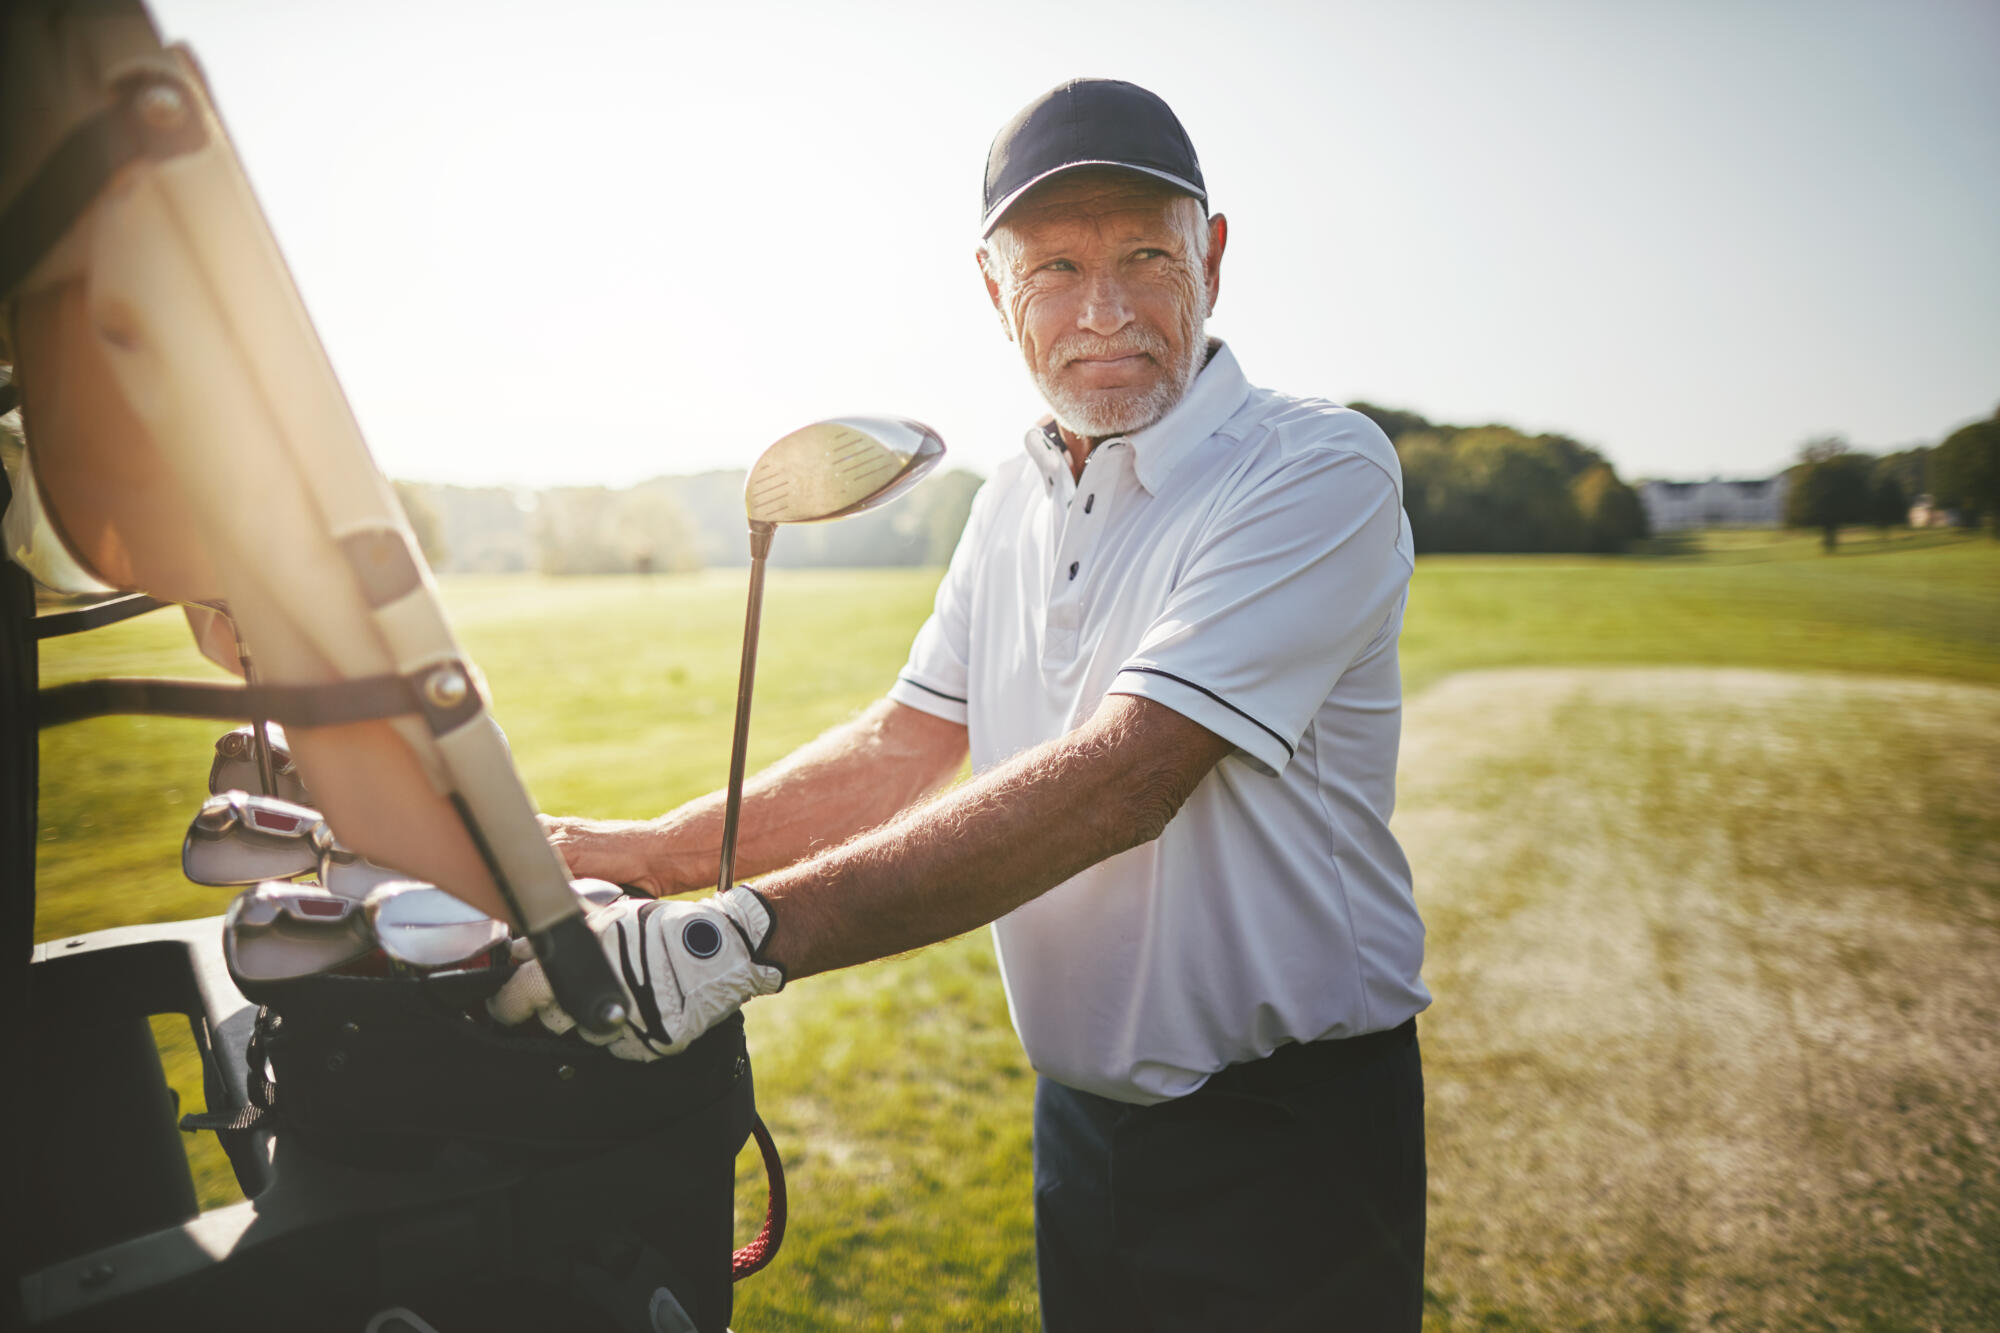 The Mental Game of Golf